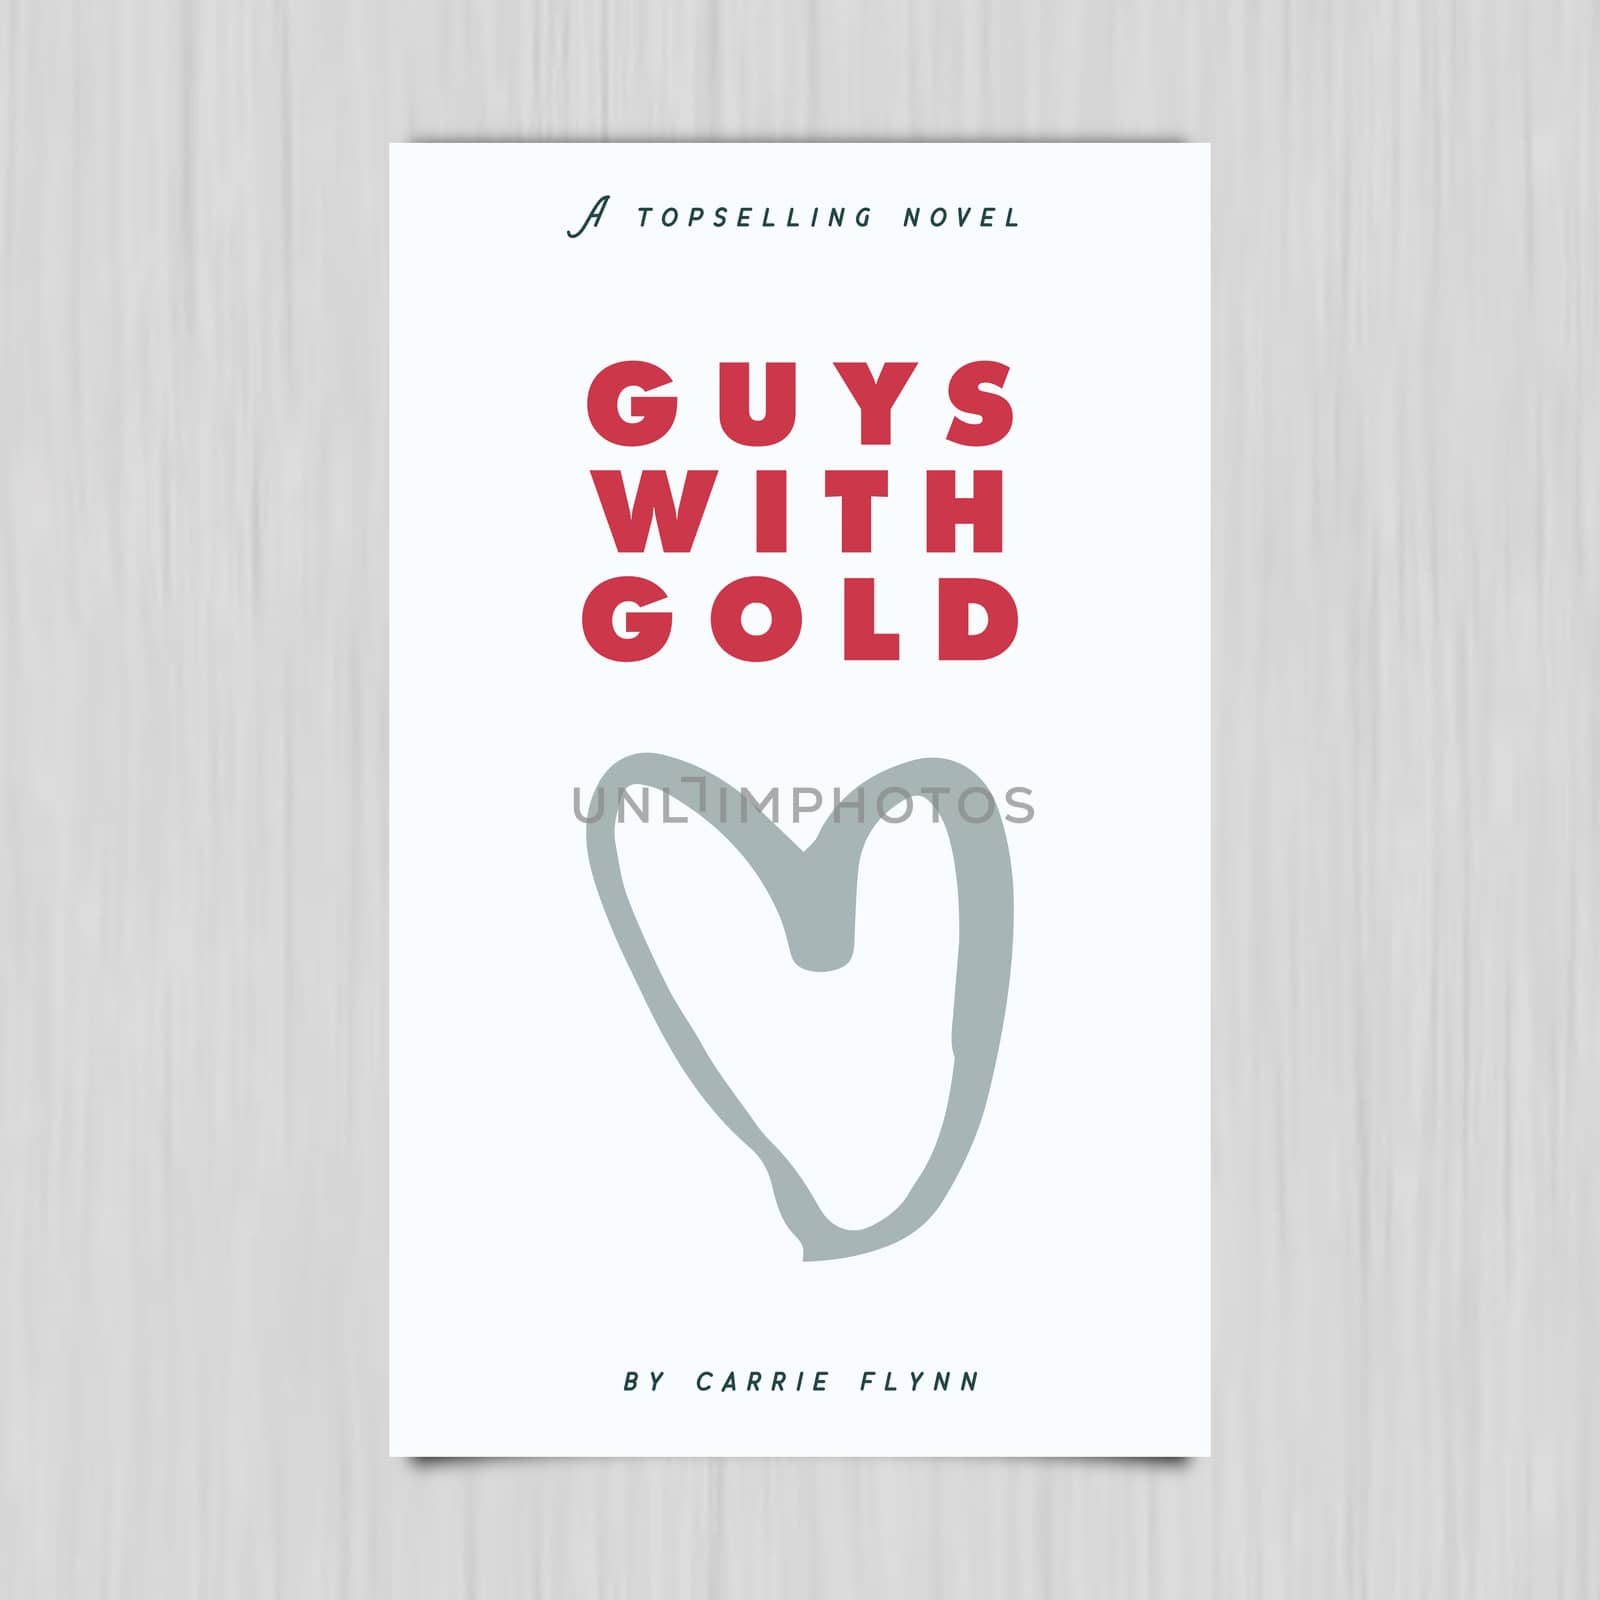 Vector of novel cover with guys with gold text against grey background